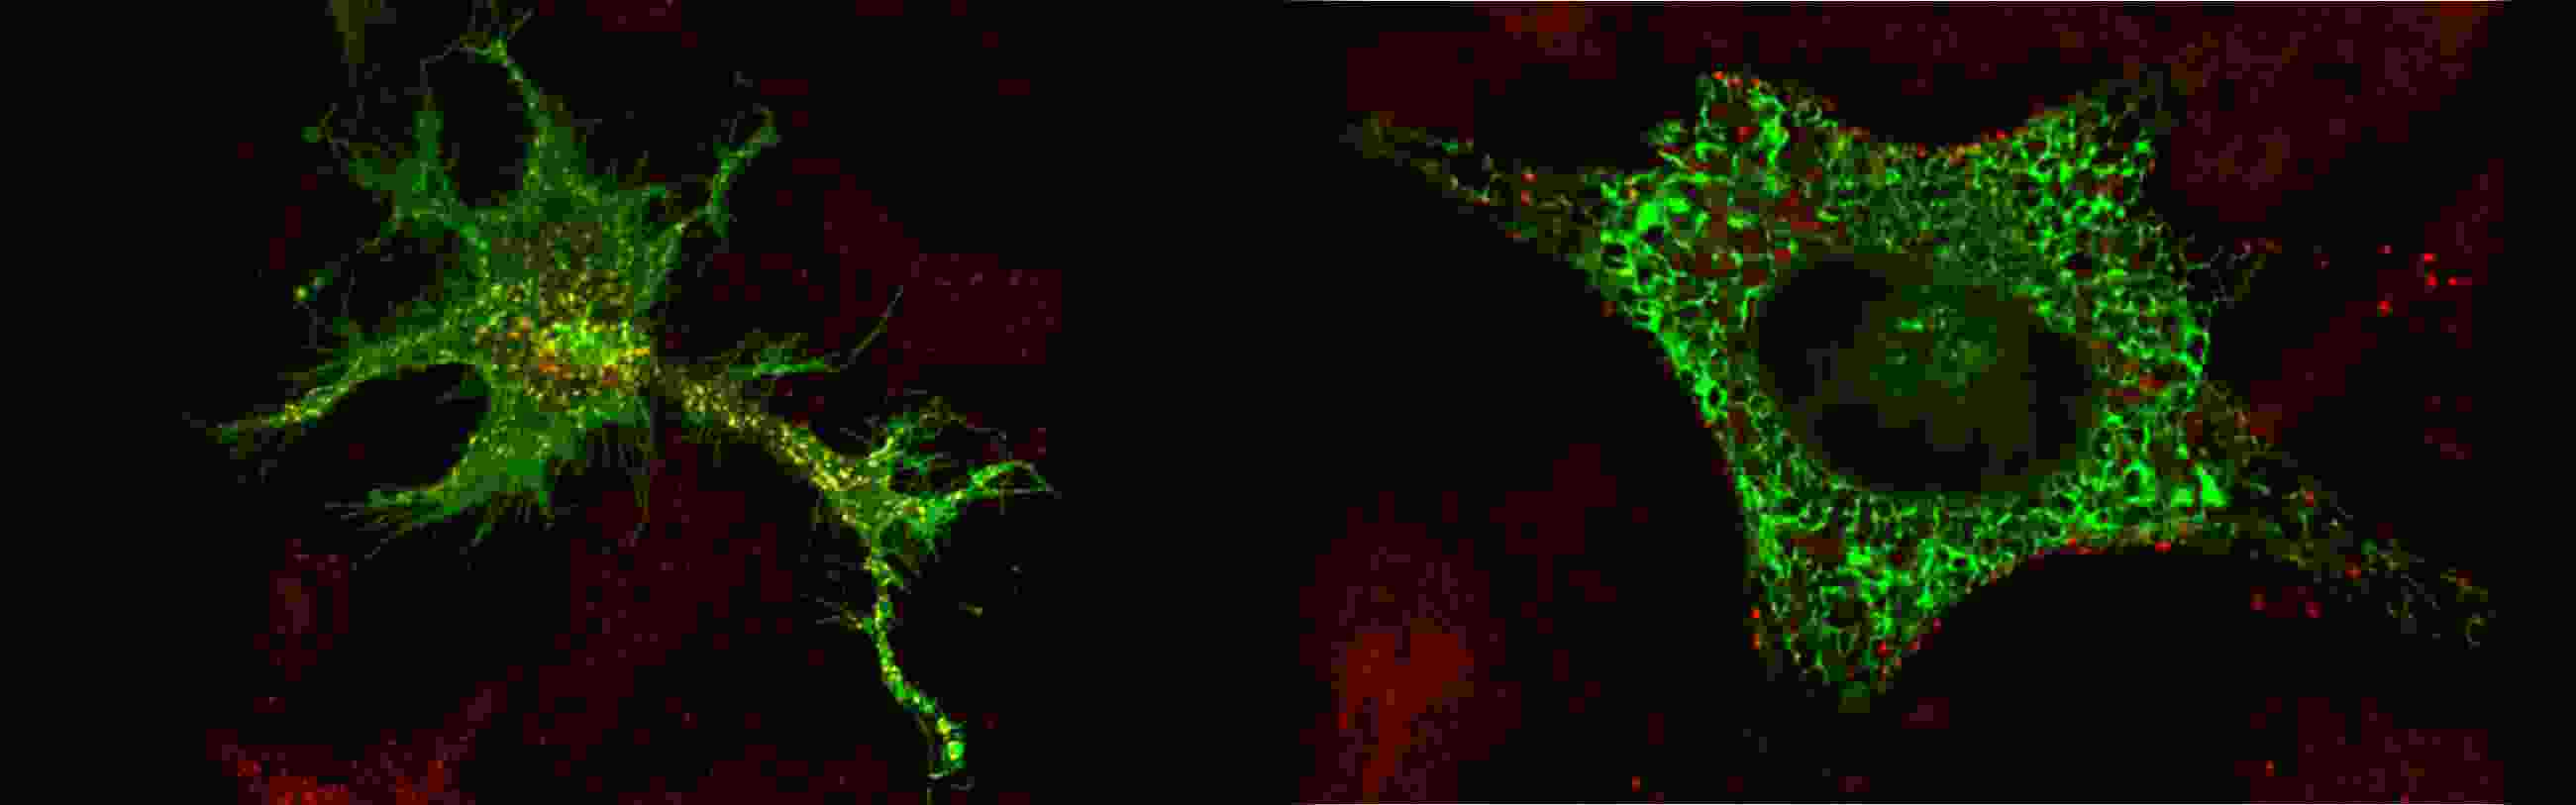 microscope images of two cells stained with red and green fluorescent markers